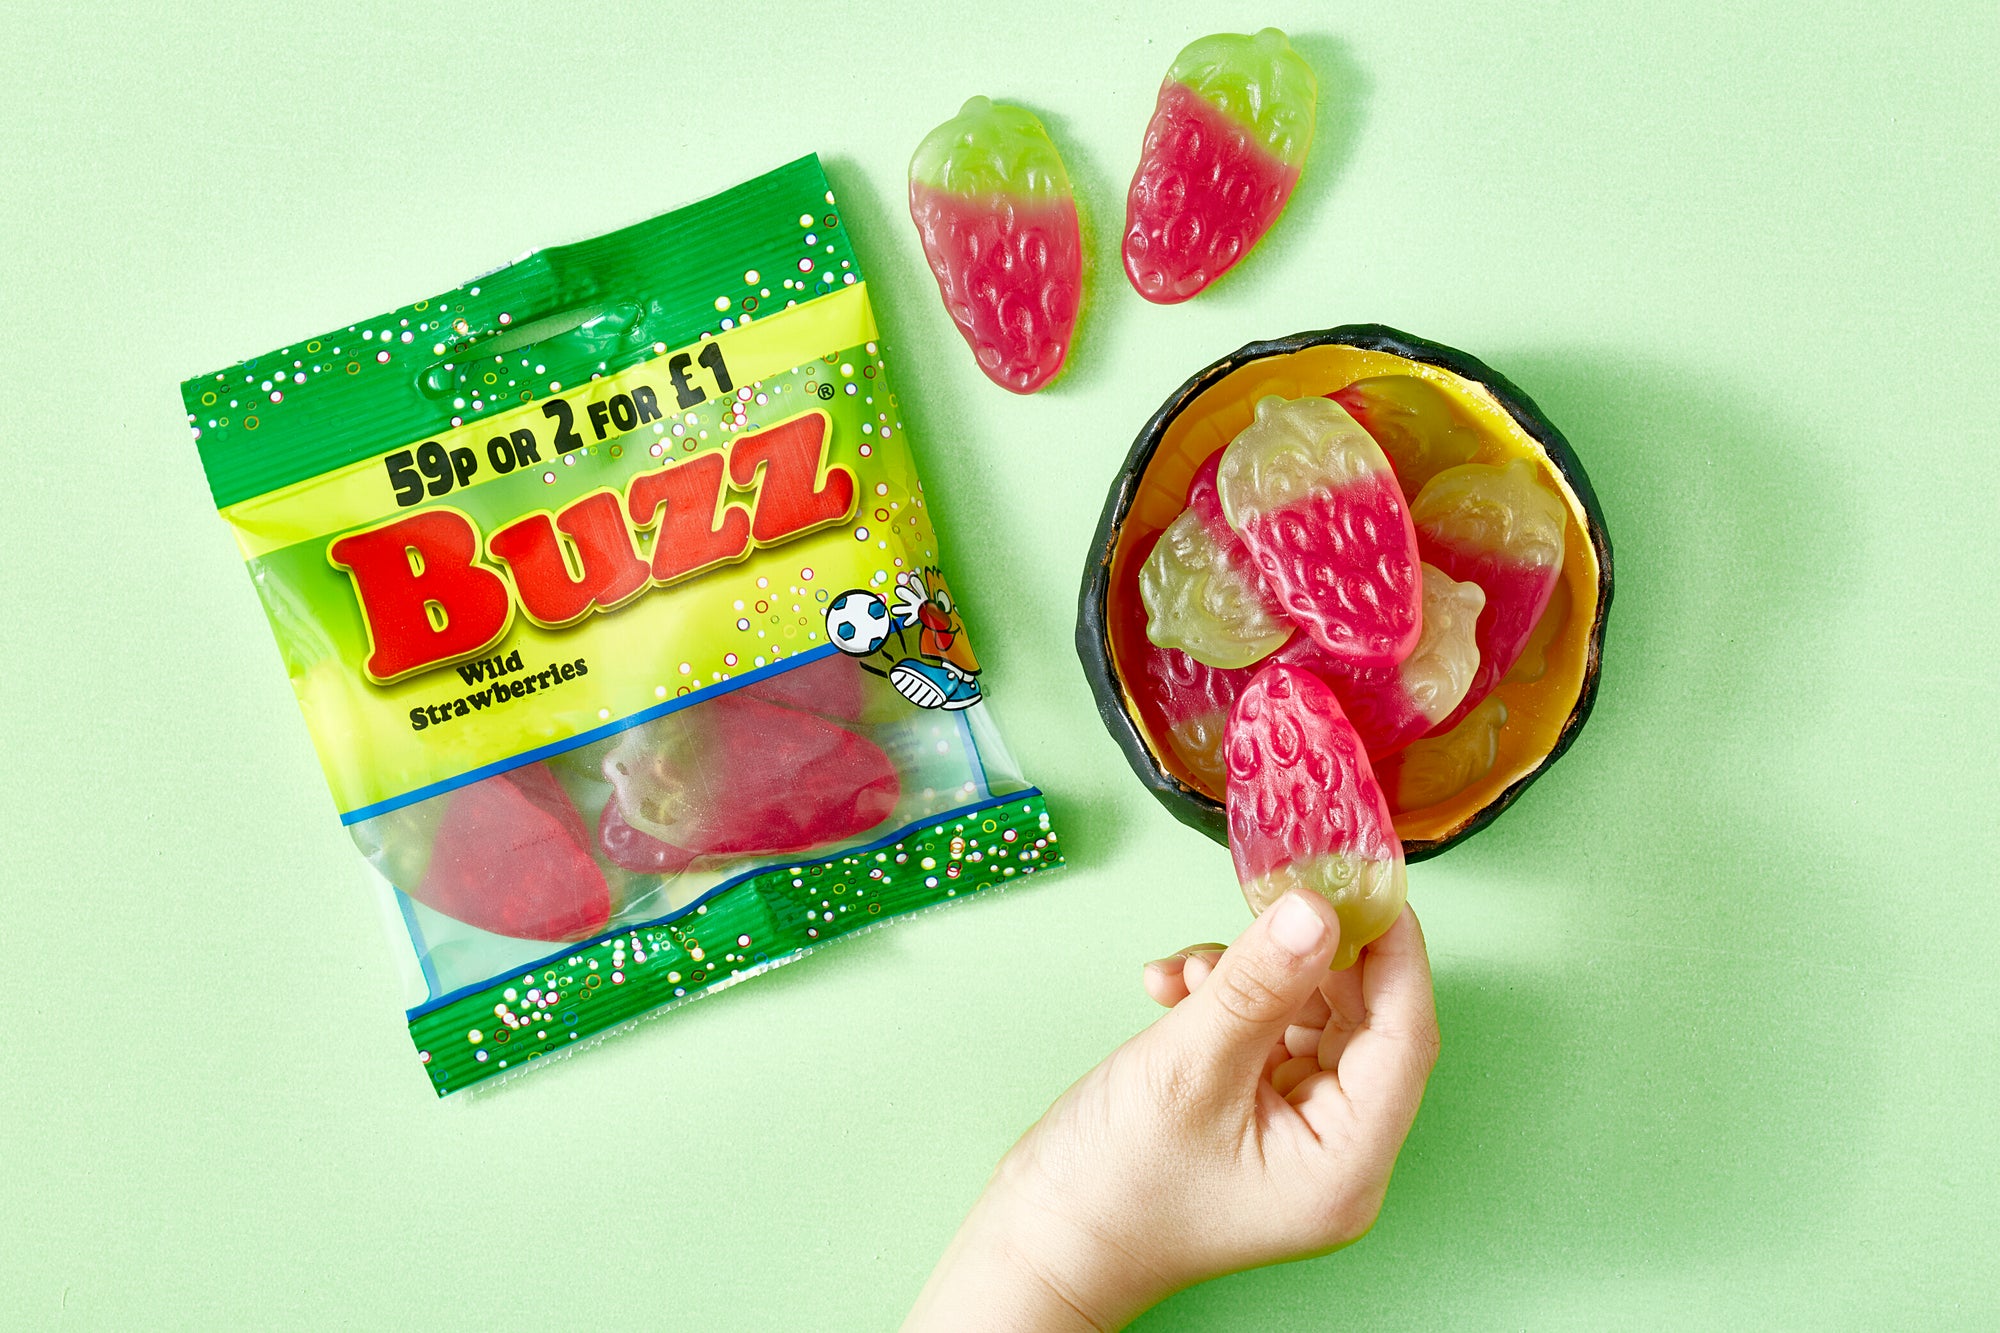 Buzz Sweets Wild Strawberries | Kids Bags